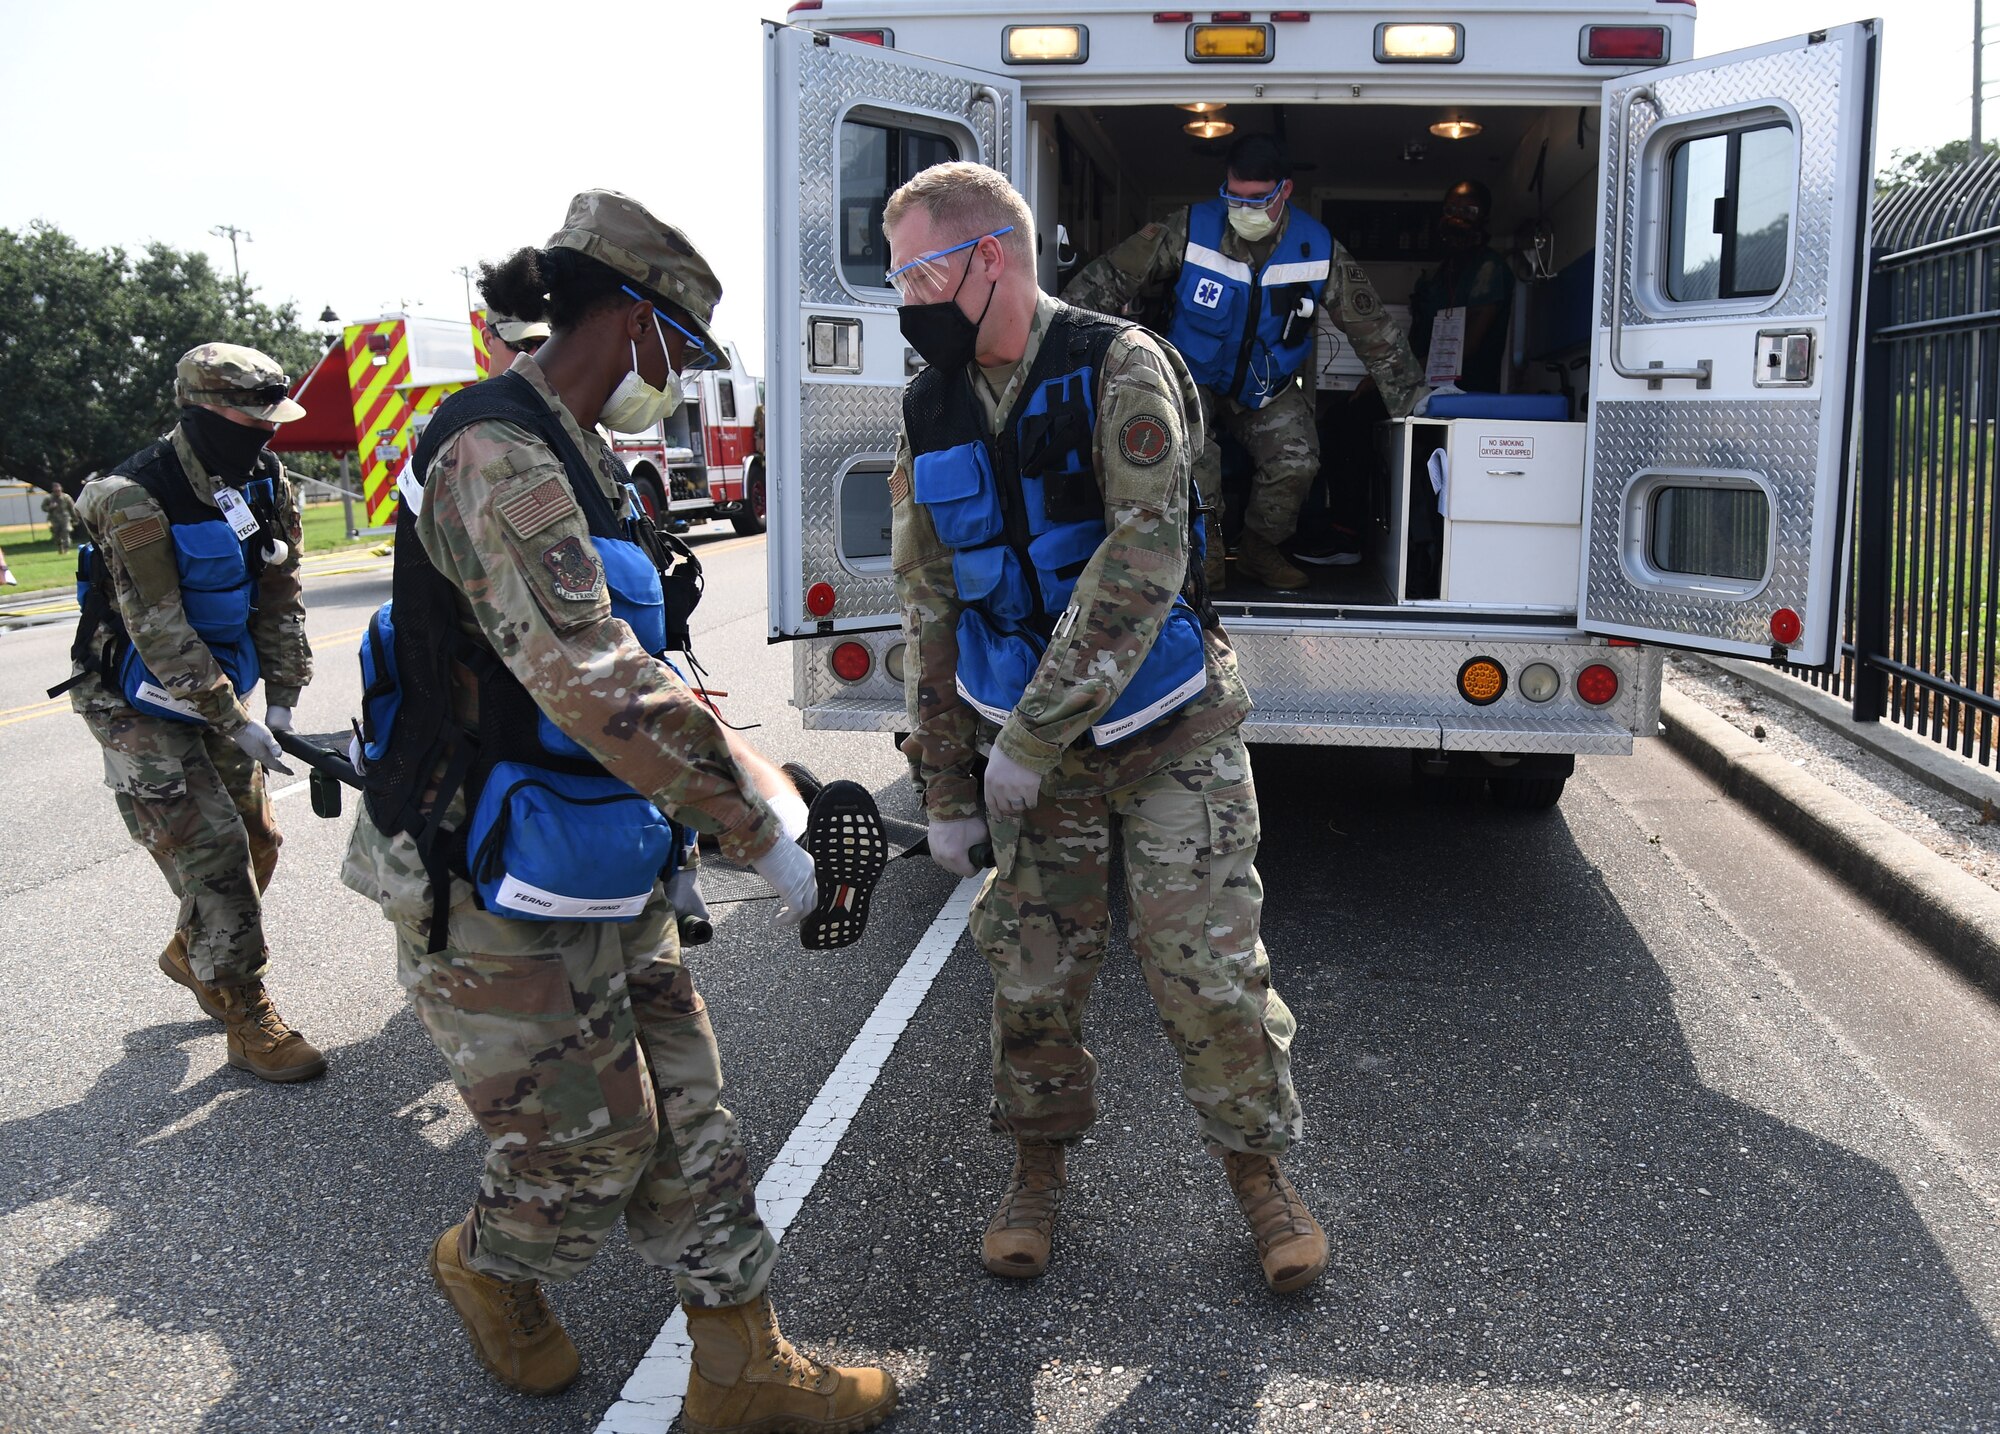 Members of the 81st Medical Group prepare to load a "victim" in the back of an ambulance during a Chemical, Biological, Radiological, Nuclear exercise at Keesler Air Force Base, Mississippi, Aug. 6, 2021. The Ready Eagle exercise tested the base's ability to respond to and recover from a mass casualty event. (U.S. Air Force photo by Kemberly Groue)